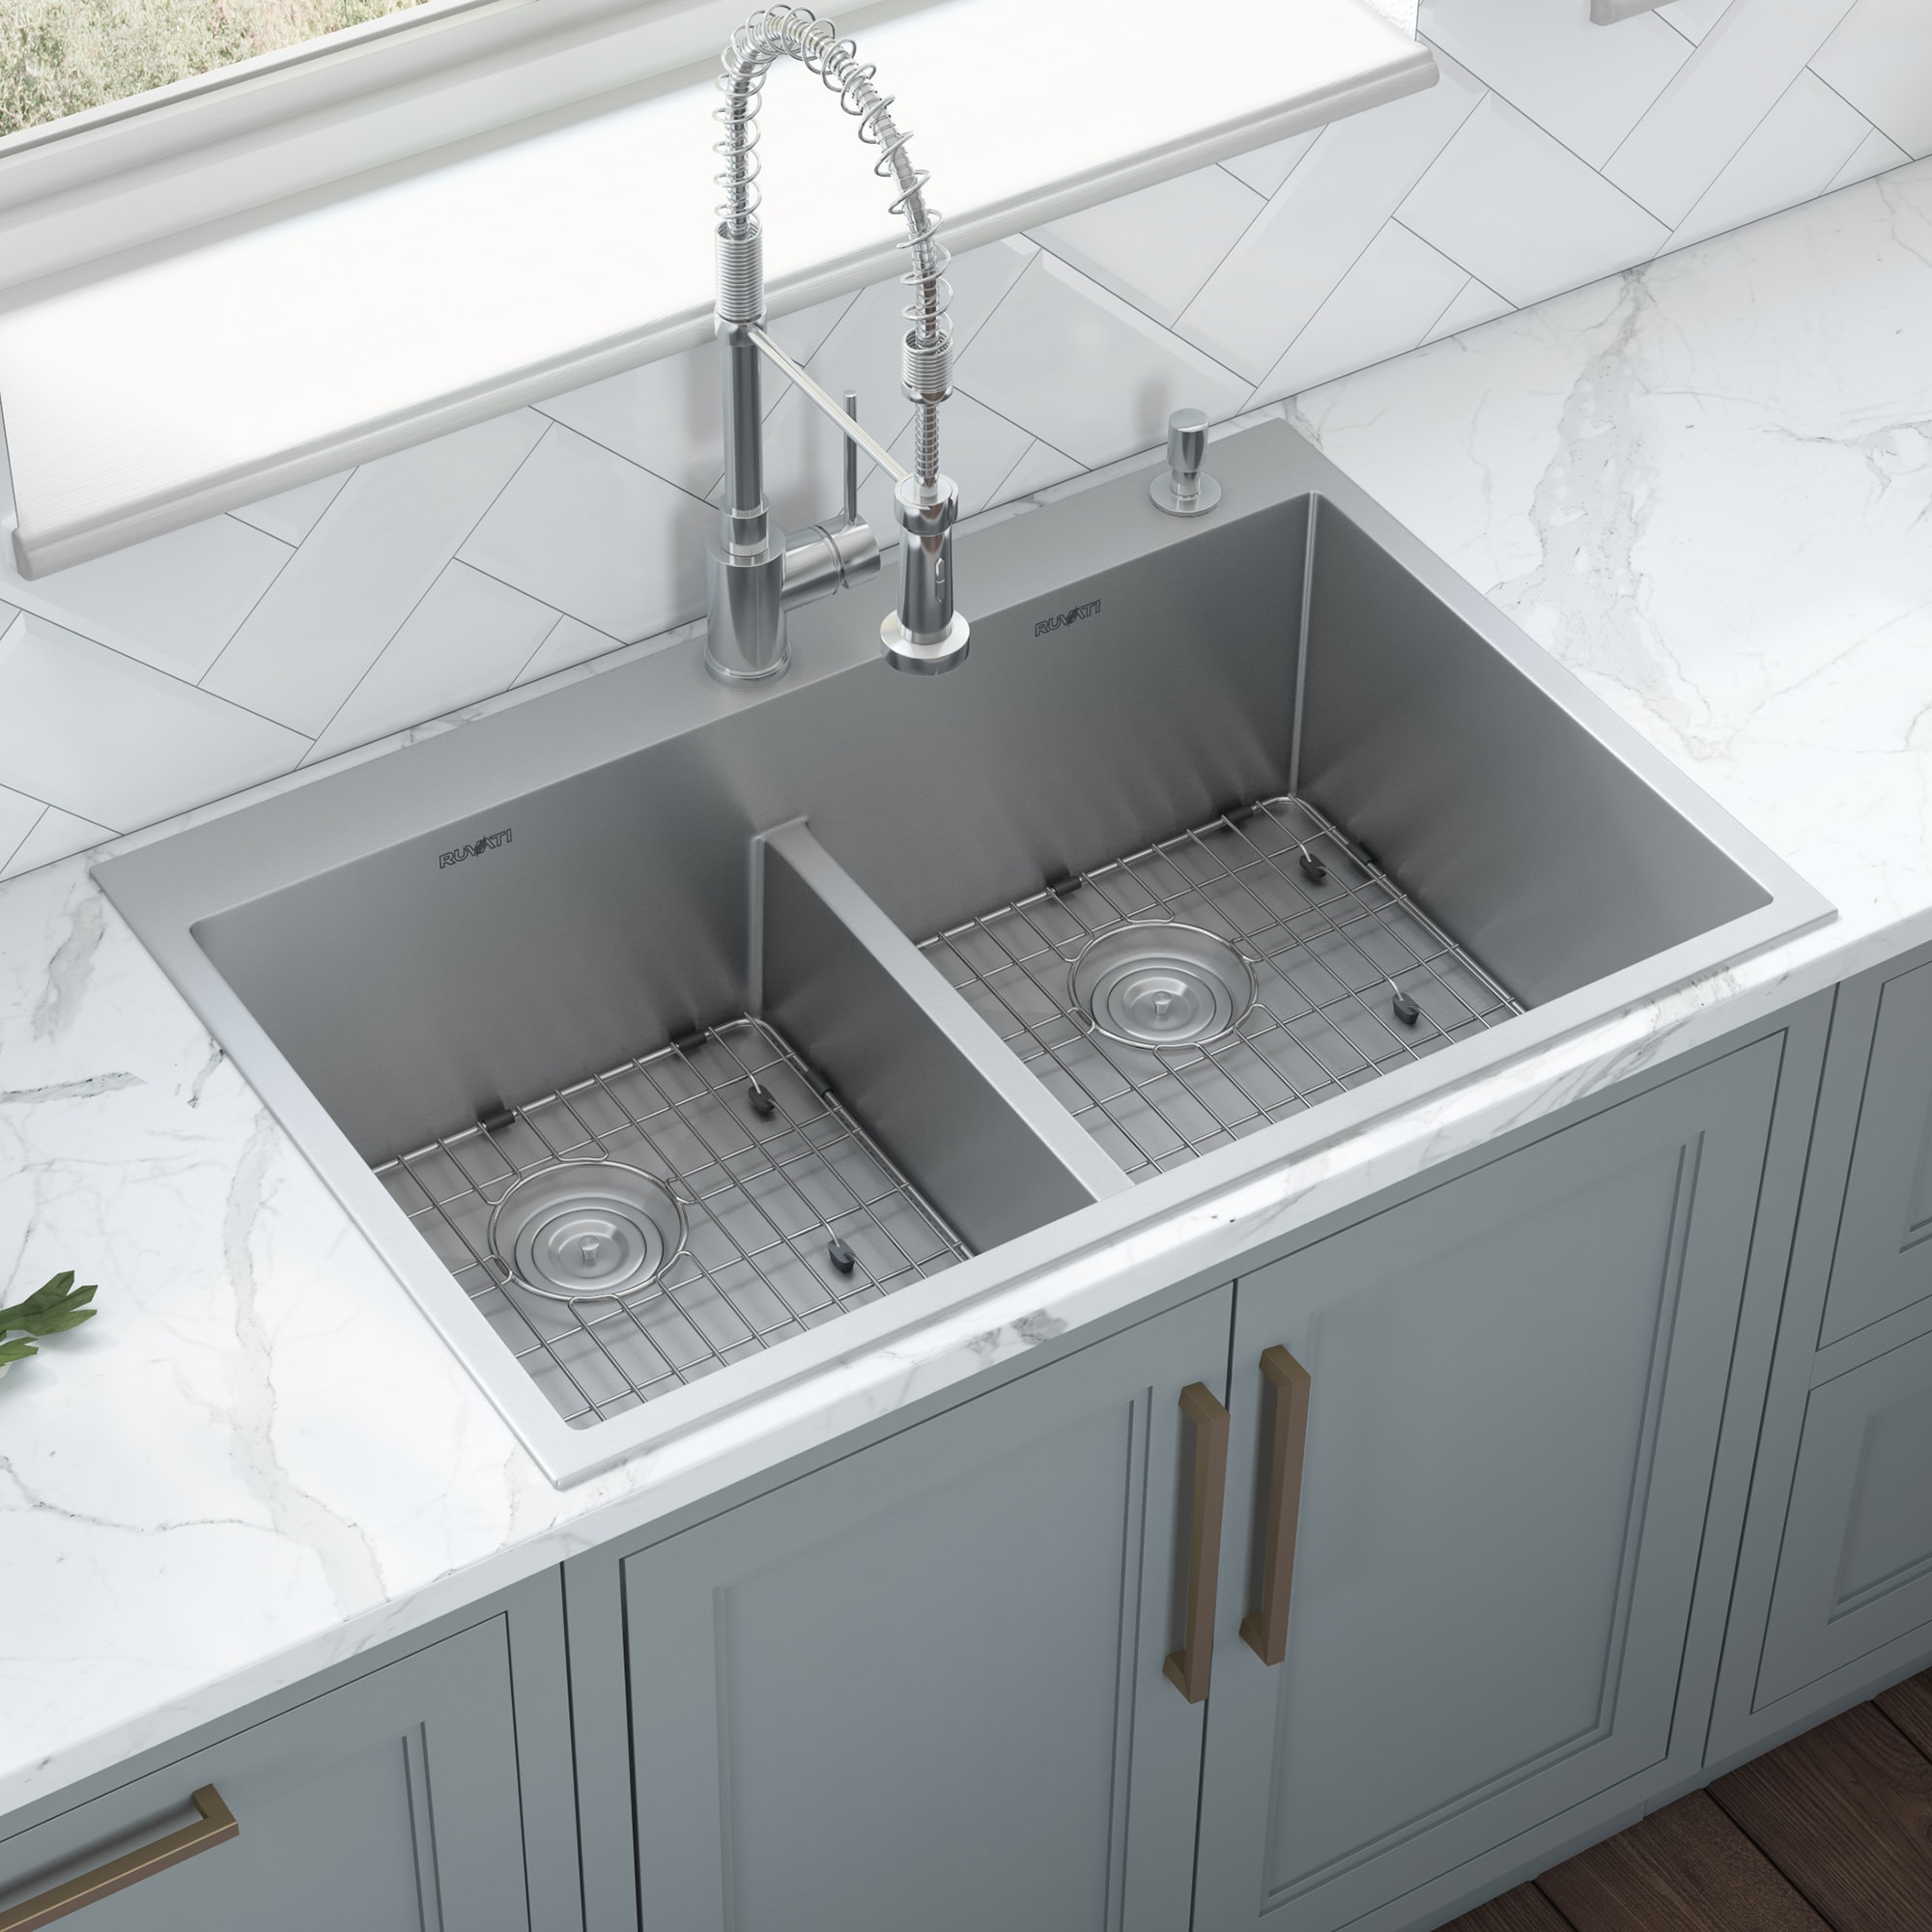 Ruvati Tirana Drop-In 33-in x 22-in Brushed Stainless Steel Double Equal  Bowl 2-Hole Kitchen Sink in the Kitchen Sinks department at